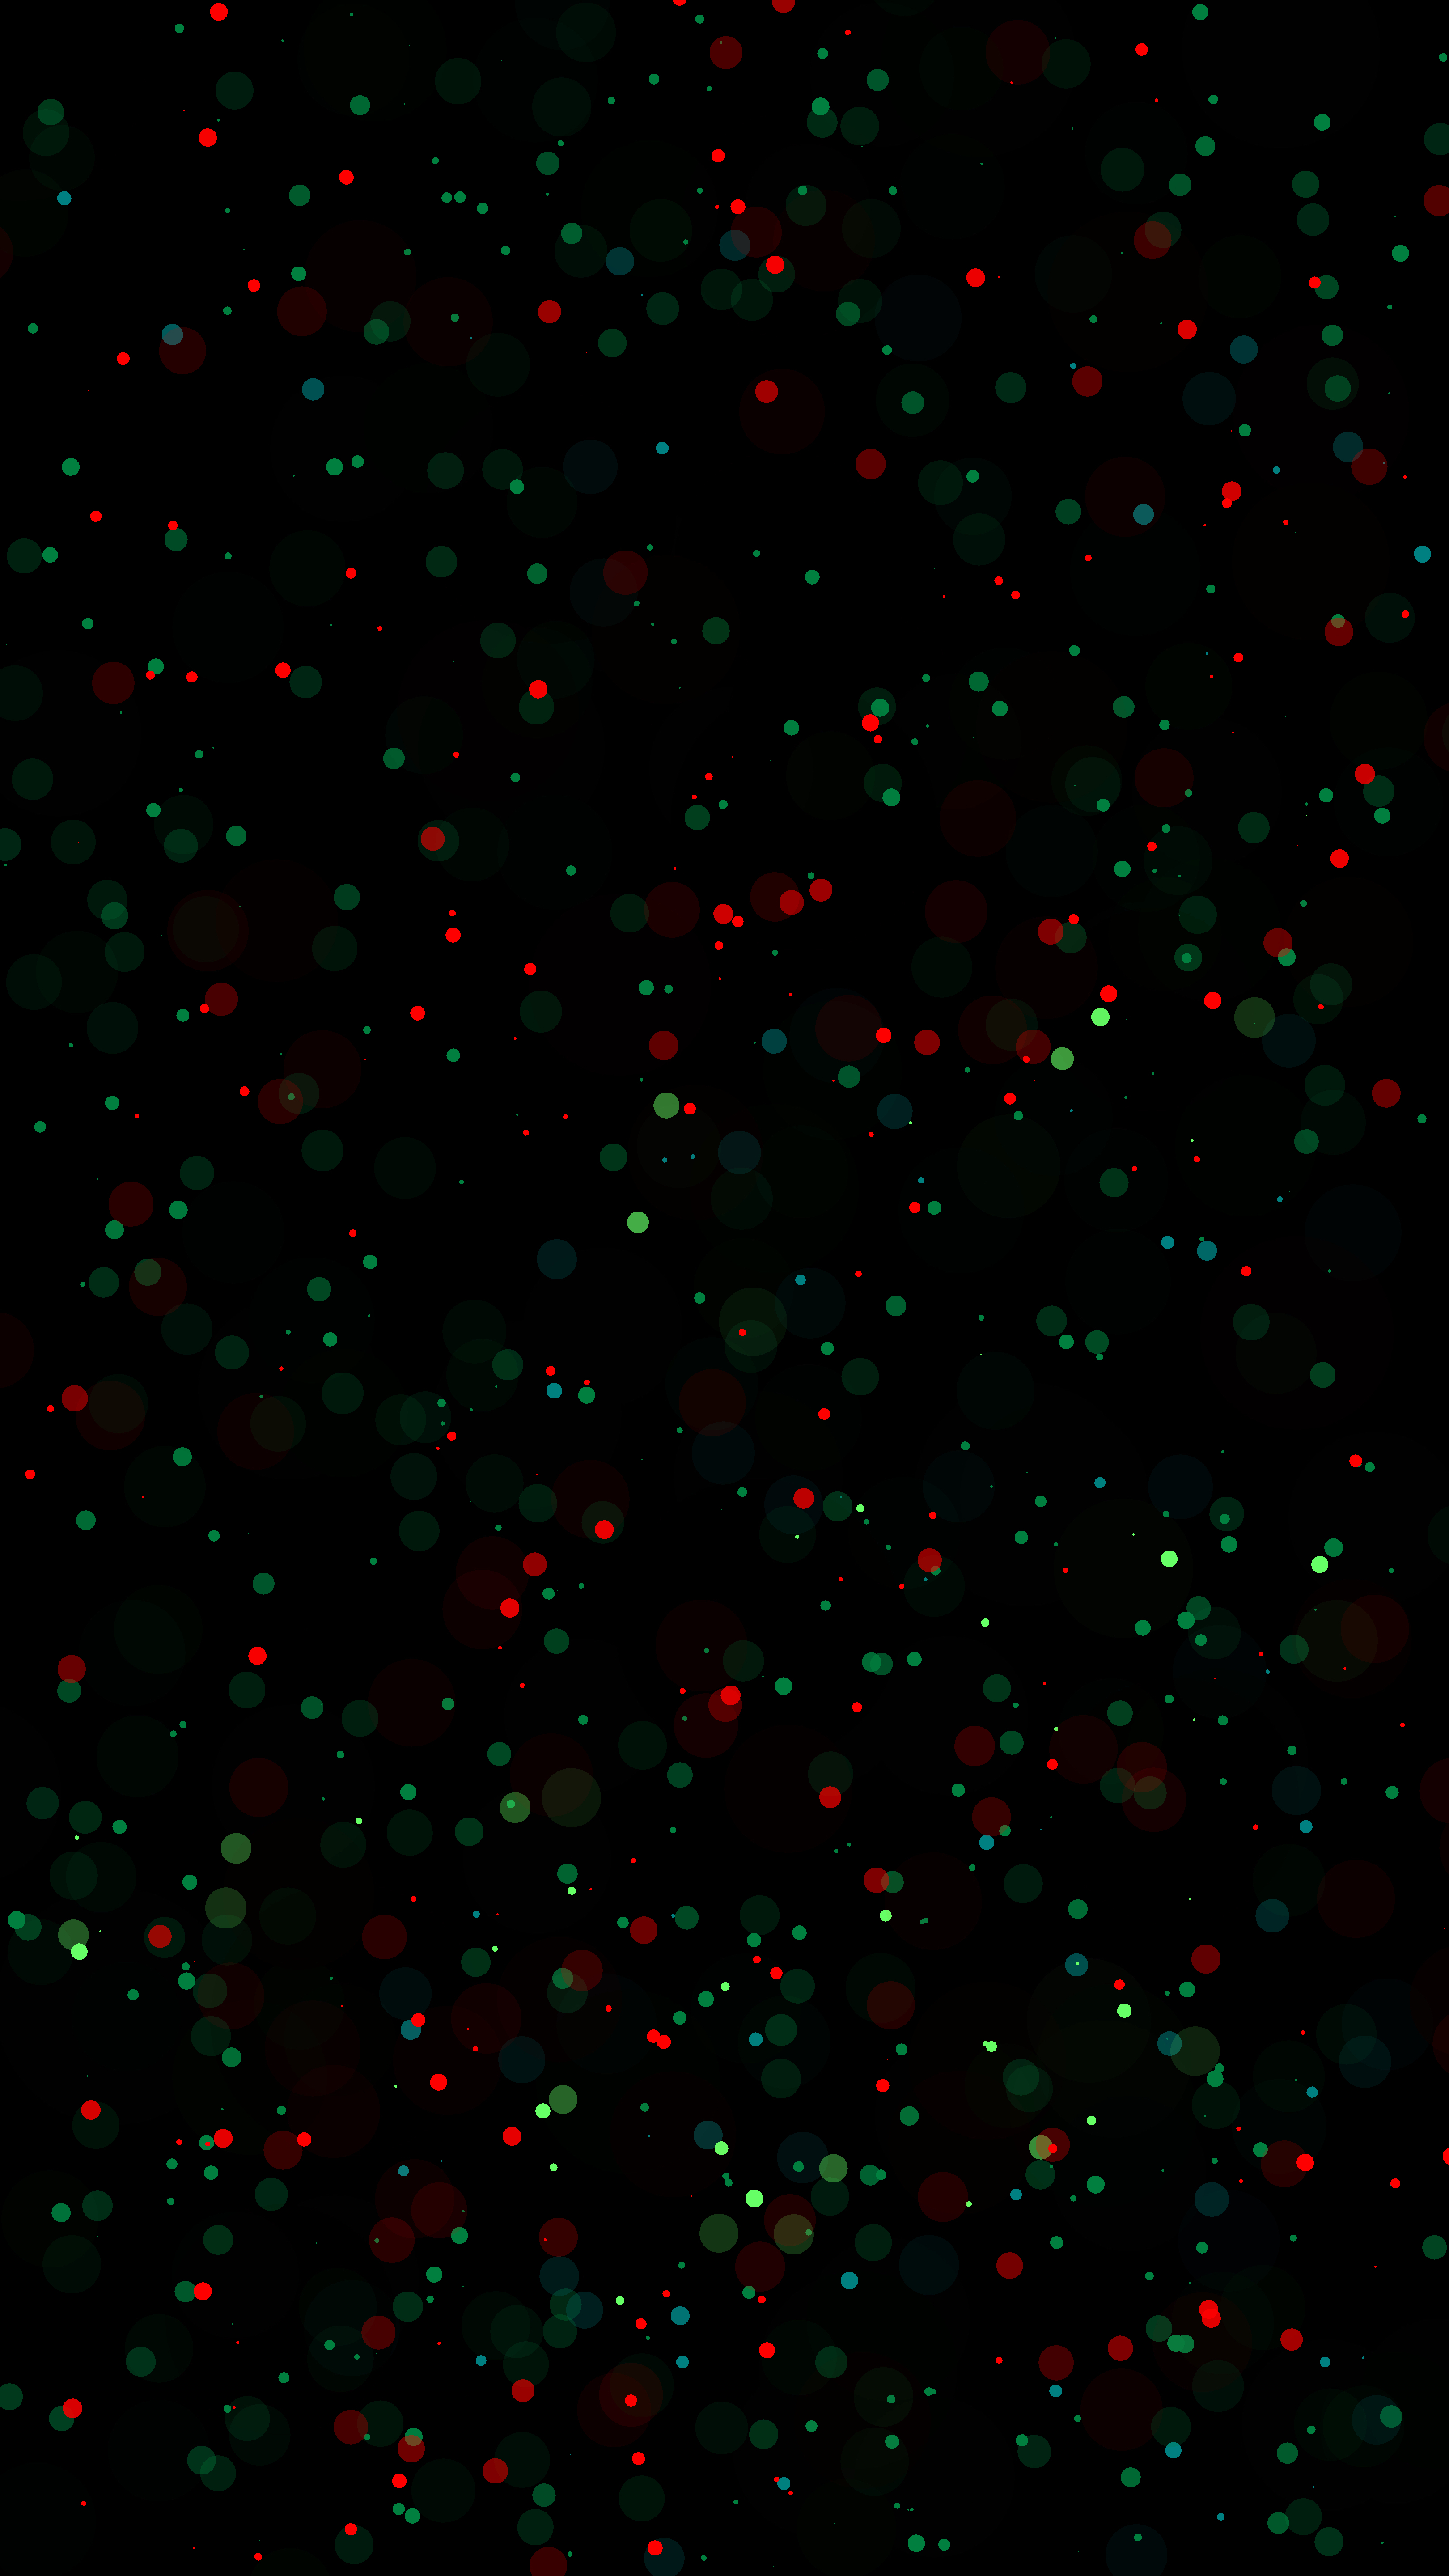 56298 download wallpaper abstract, green, red, glare, circles, points, point, bokeh, boquet screensavers and pictures for free